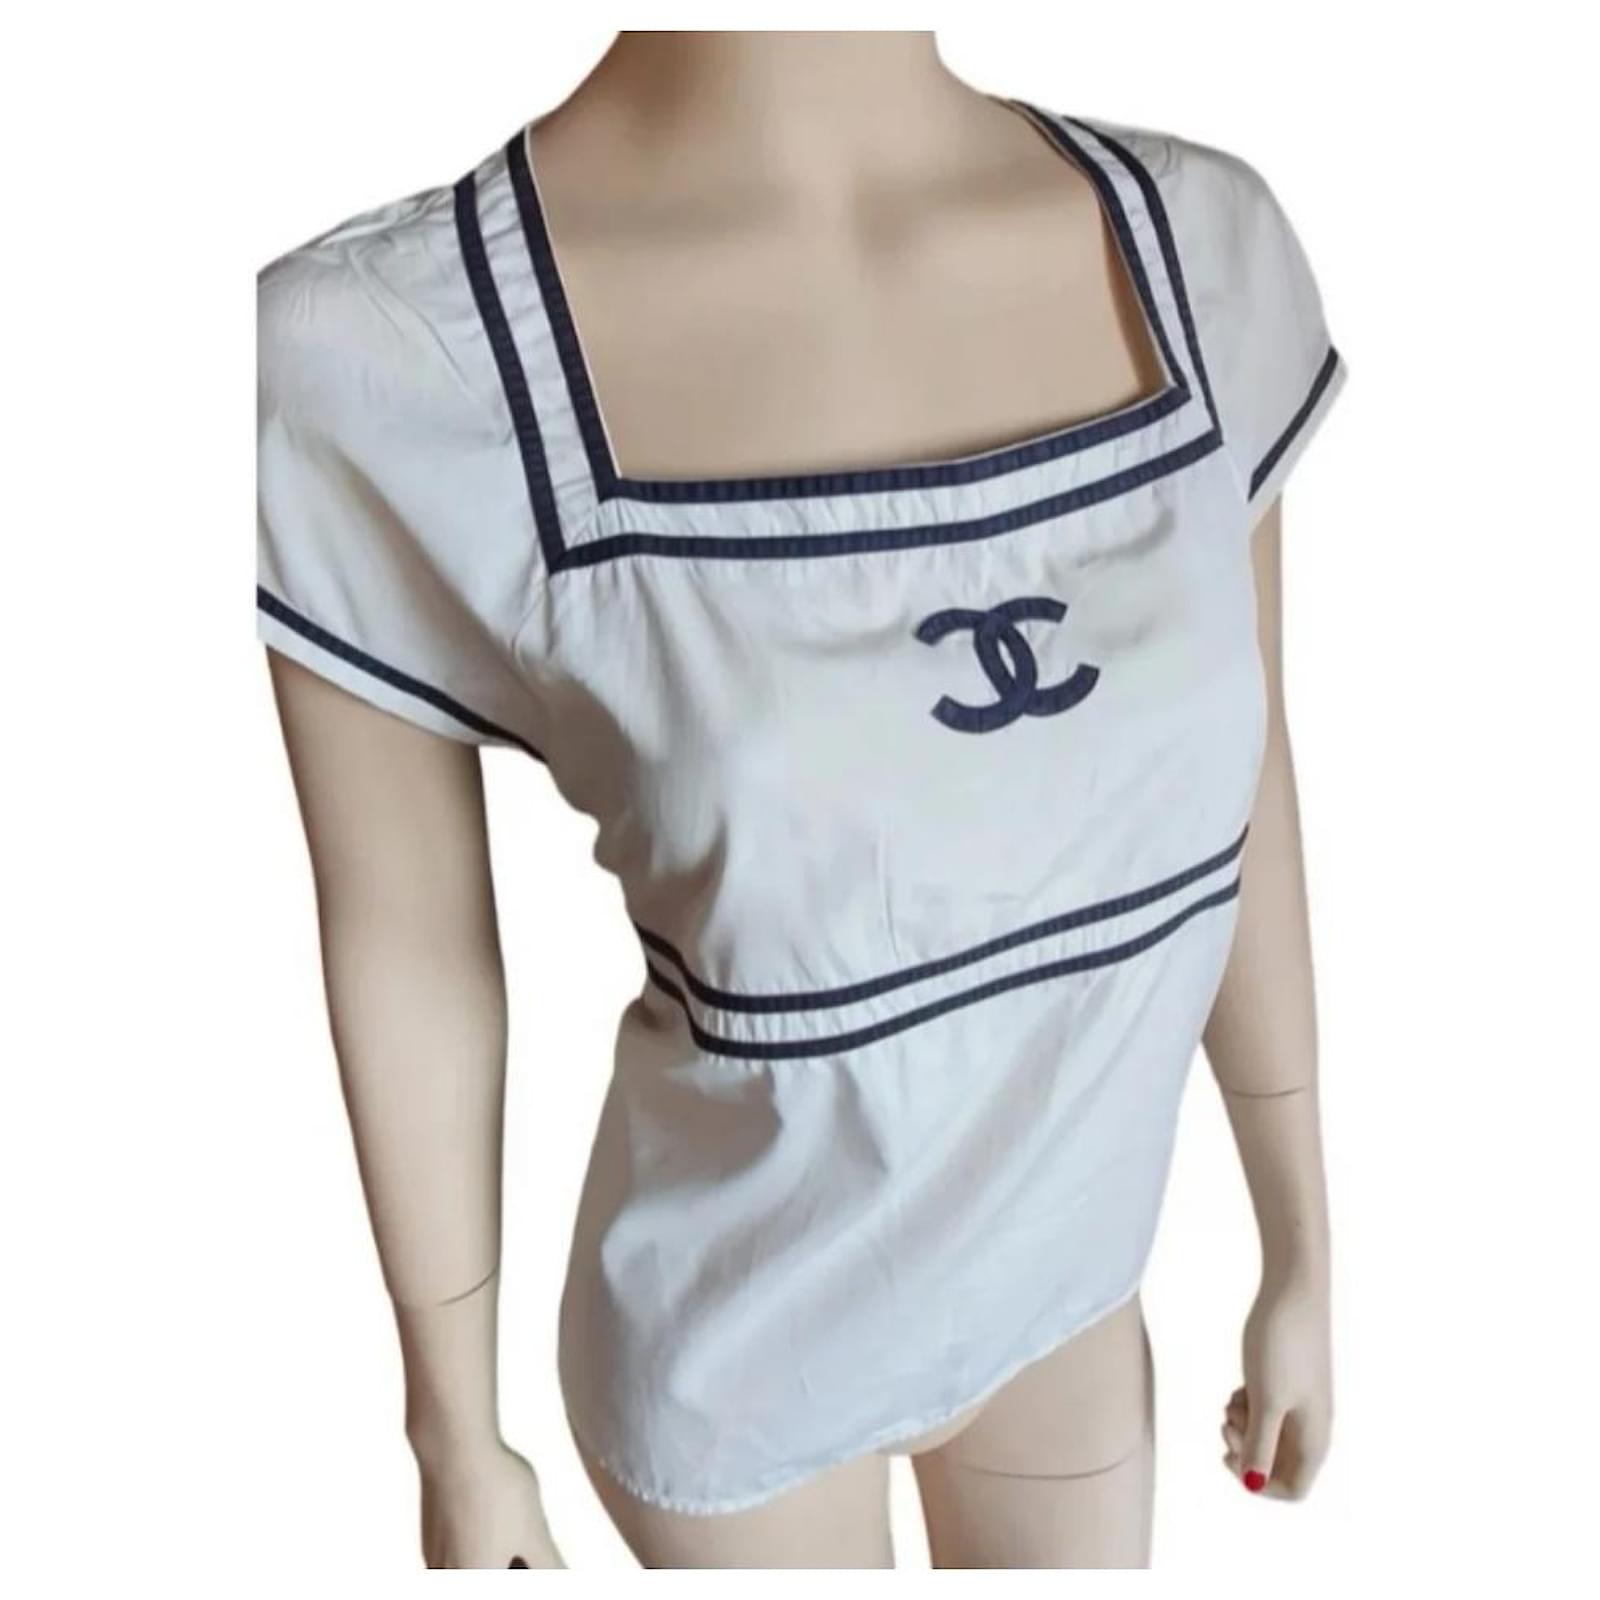 CHANEL, Tops, Auth Chanel Vintage Cc Logo White Sleeveless High Neck Top  Fits Xss